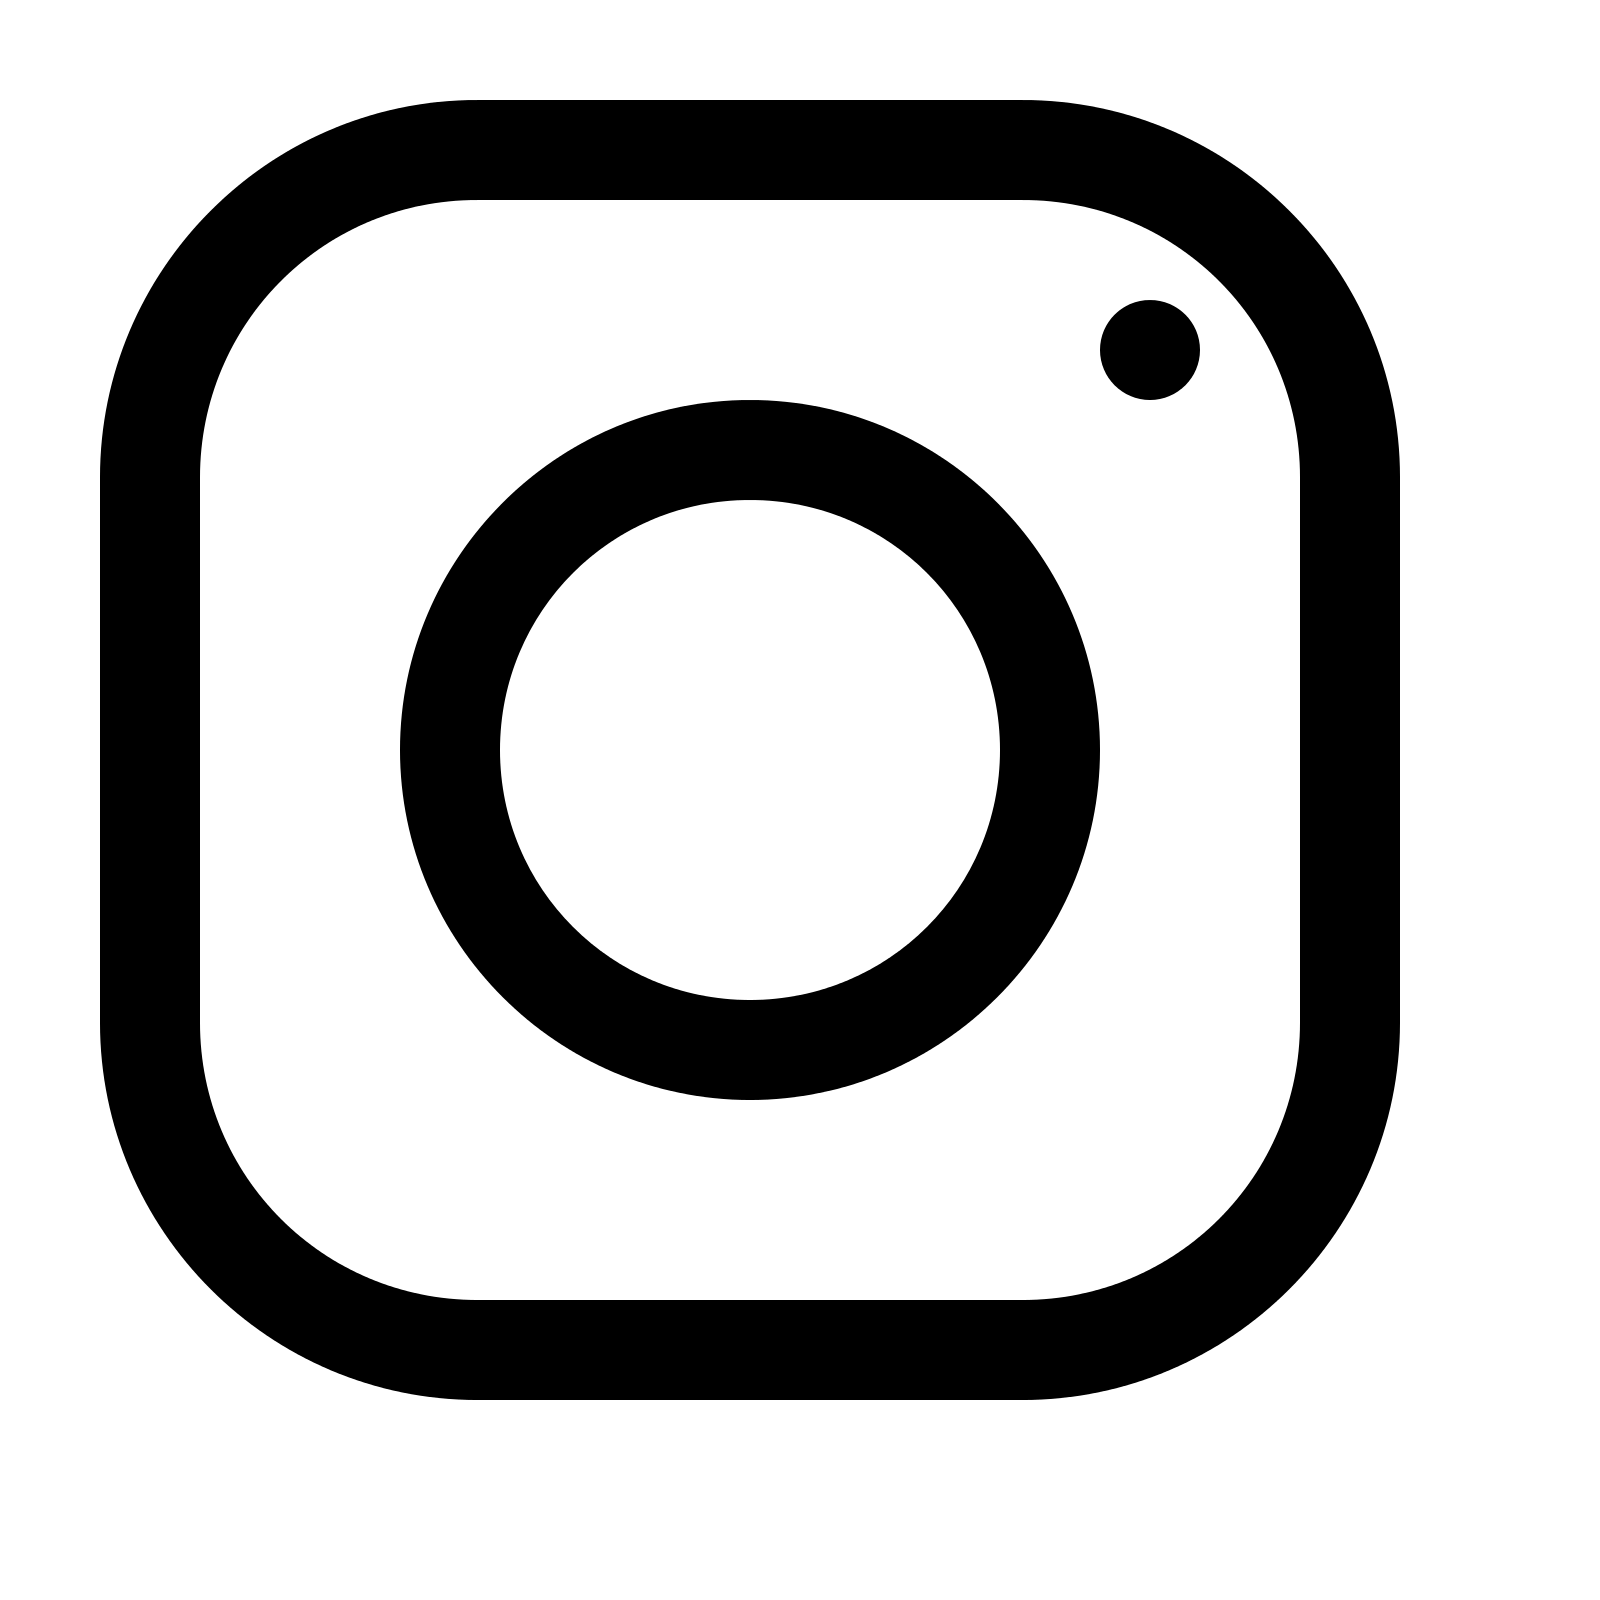 Cute Black and White Instagram Logo - White instagram logo png- pictures and cliparts, download free.